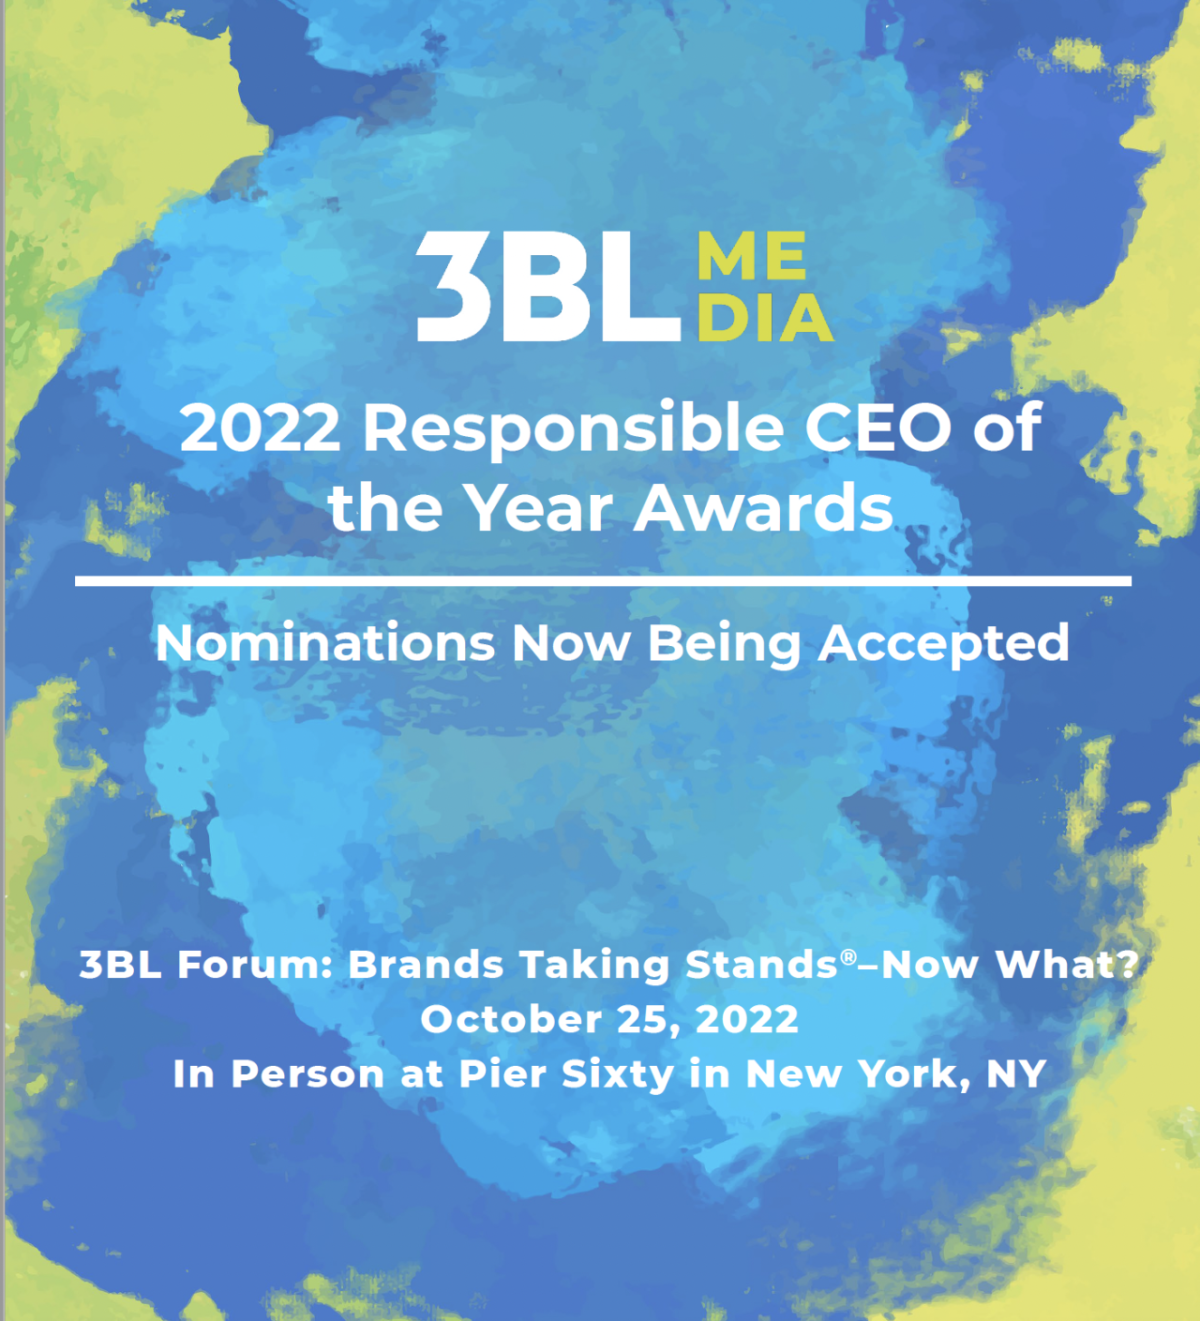 3BL Media 2022 Responsible CEO of the year awards